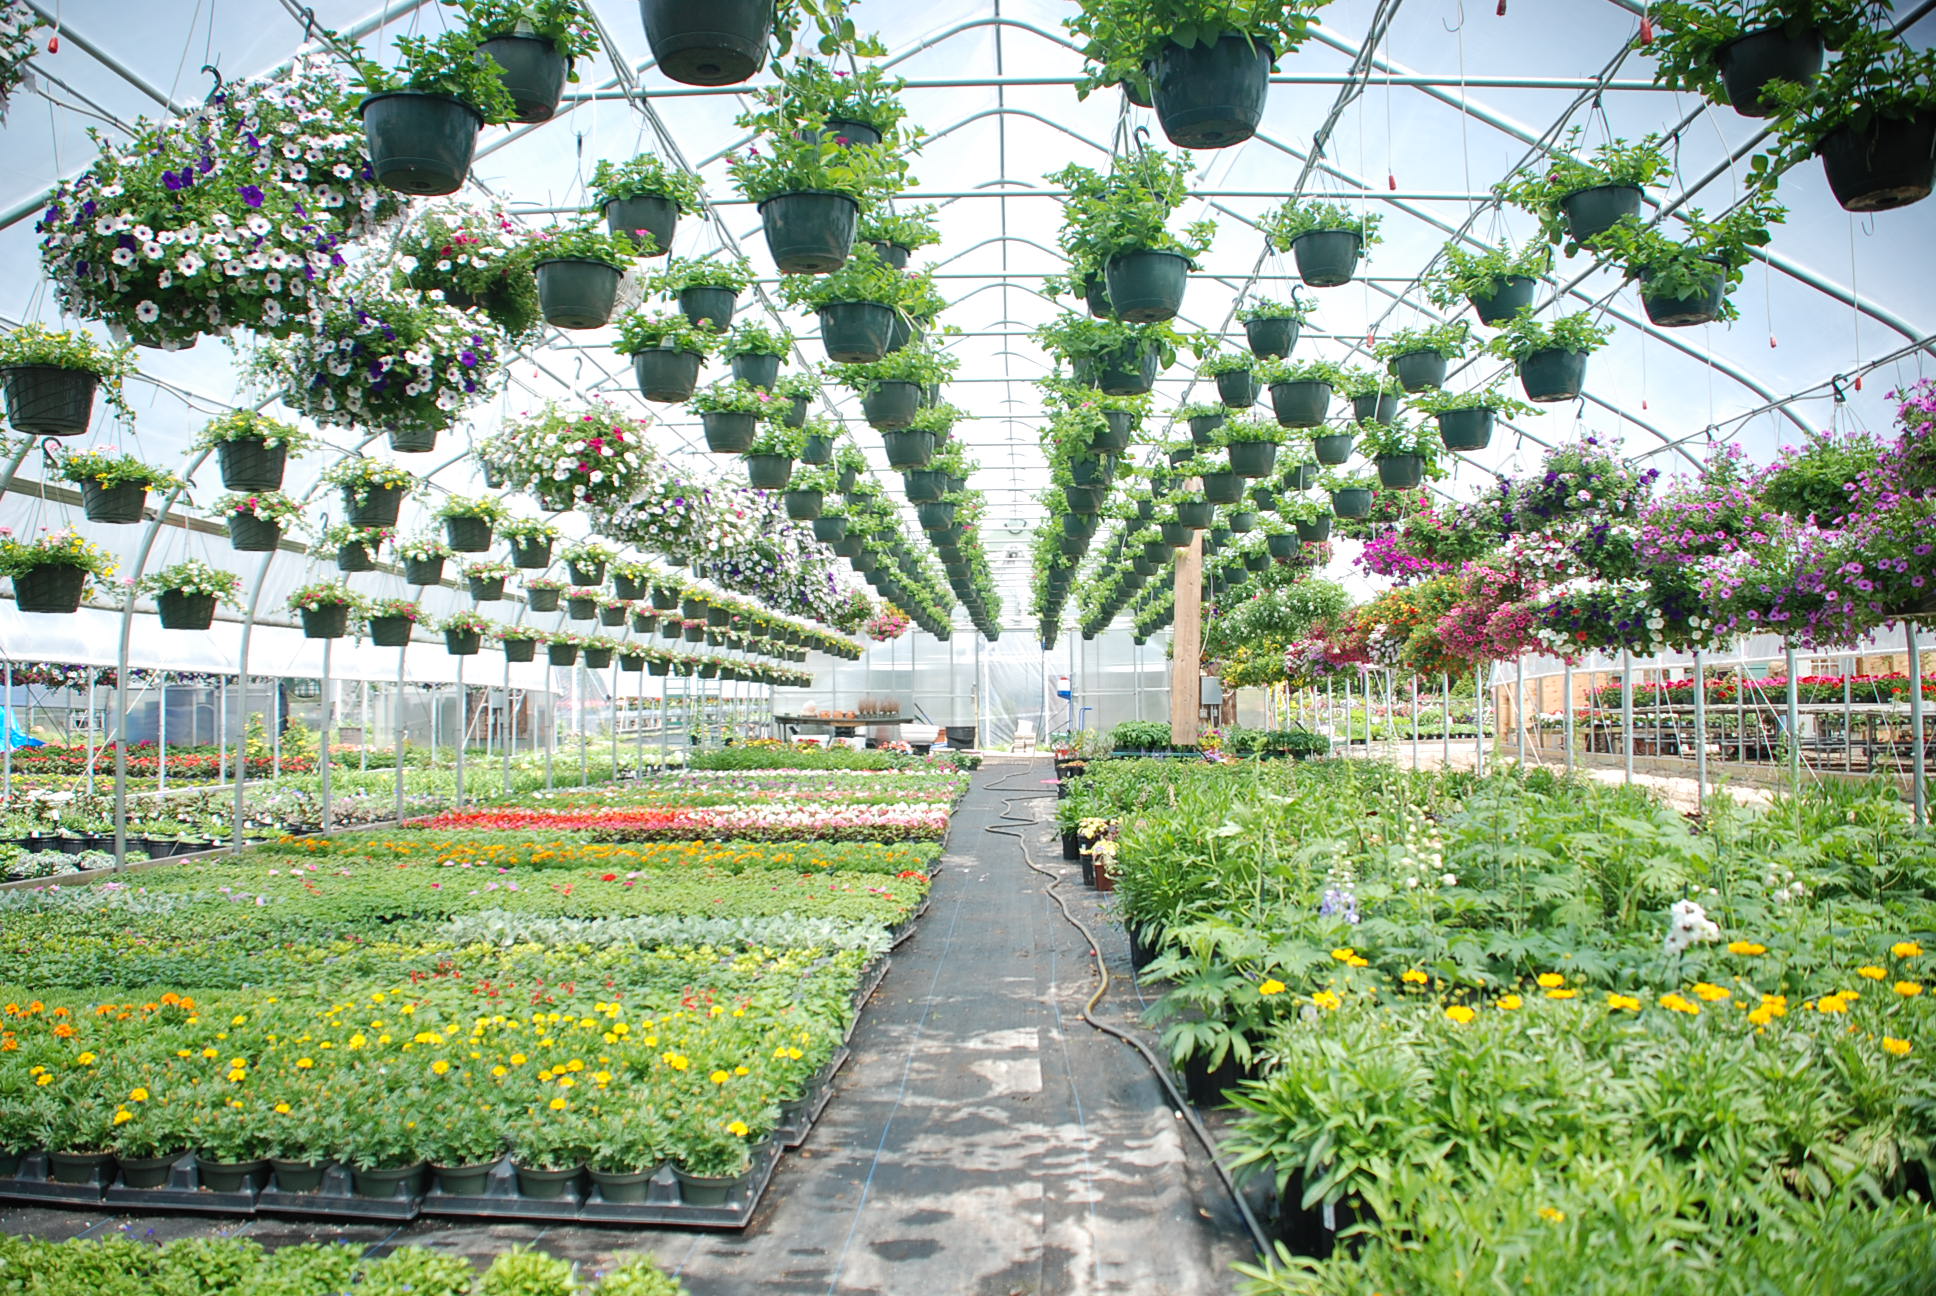 Controlling Greenhouse Humidity During Summer’s Hottest Months